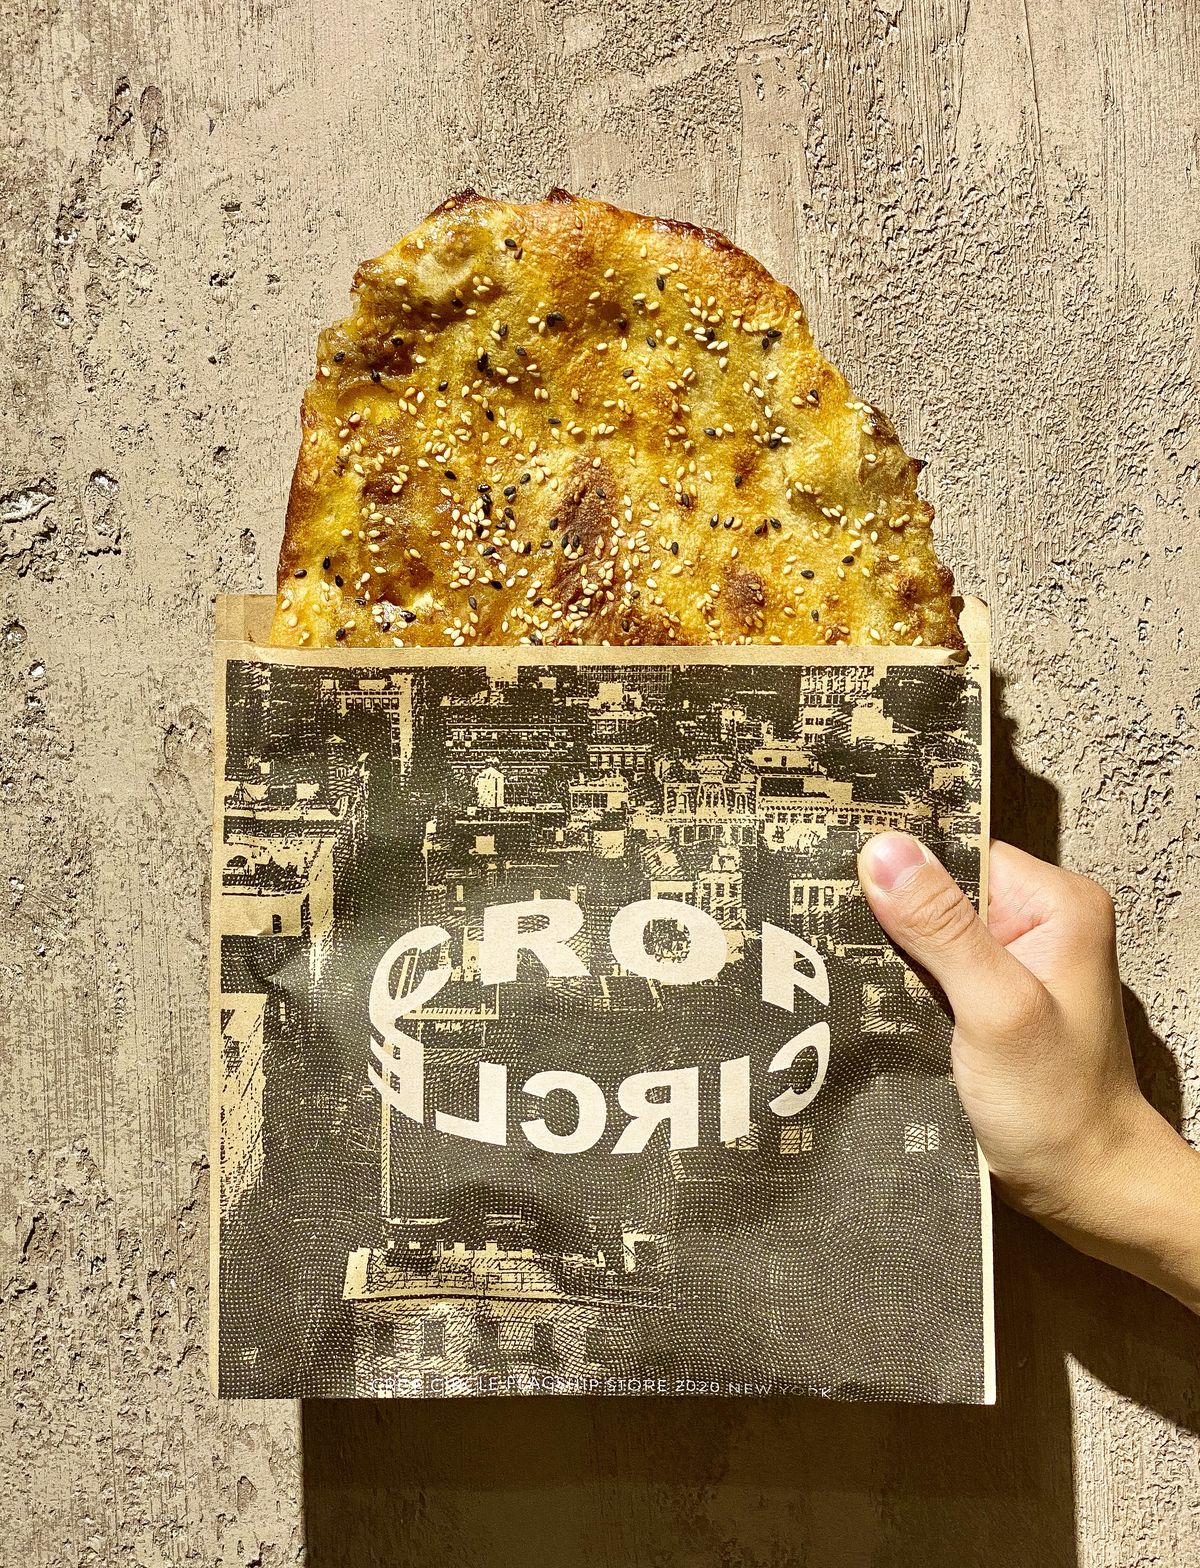 A hand holding a packet reading “Crop Circle” with a large flat bread placed inside